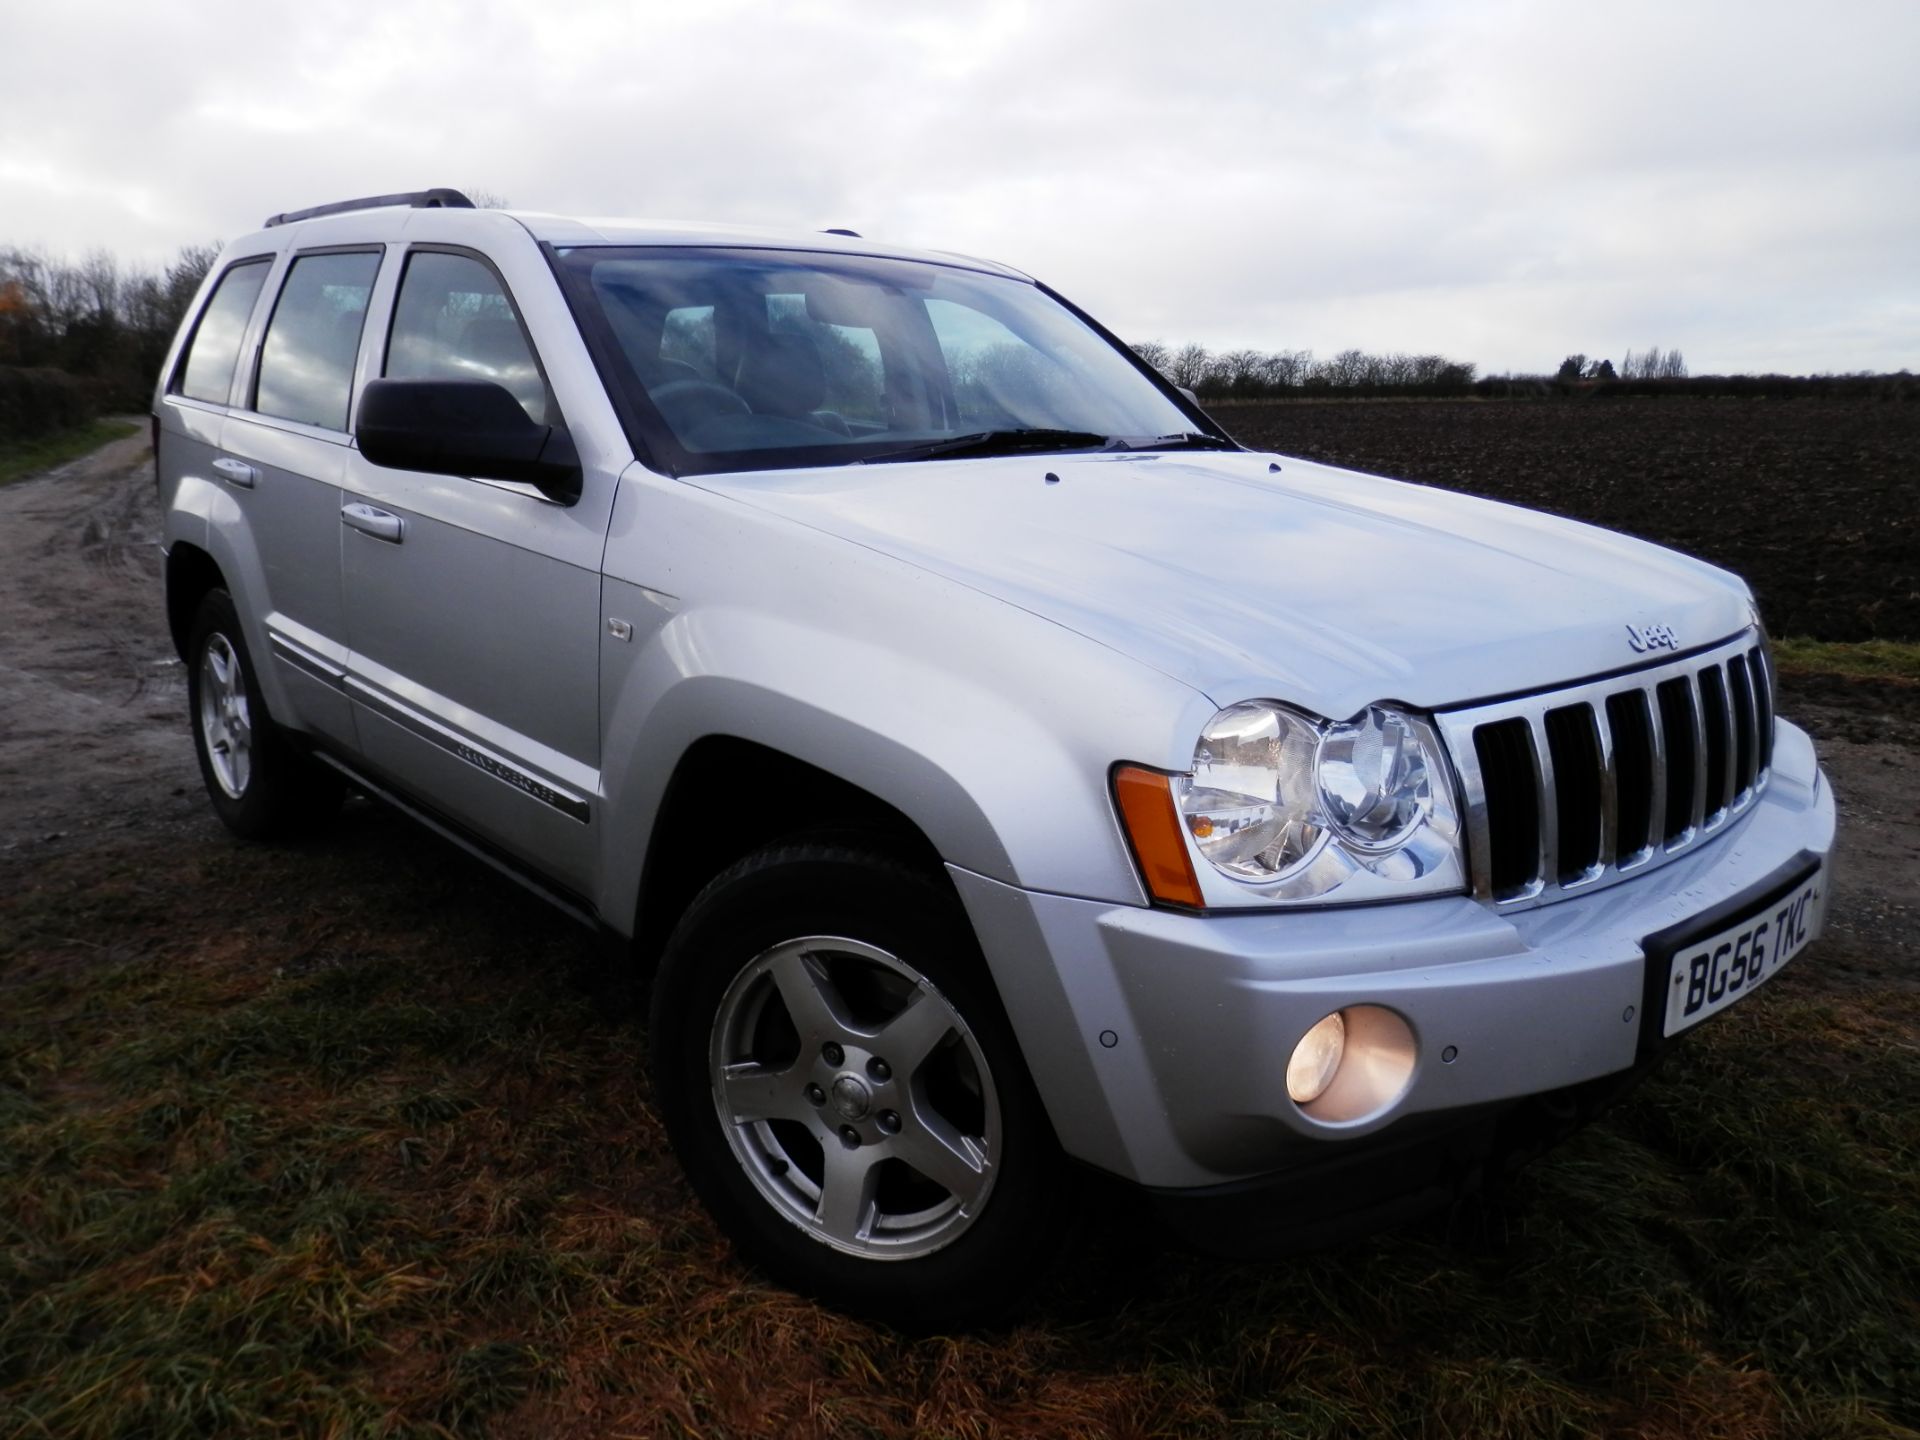 2006/56 PLATE JEEP GRAND CHEROKEE 3.0 CRD V6 TURBO DIESEL AUTO. ONLY 92K MILES. 12 MONTHS MOT